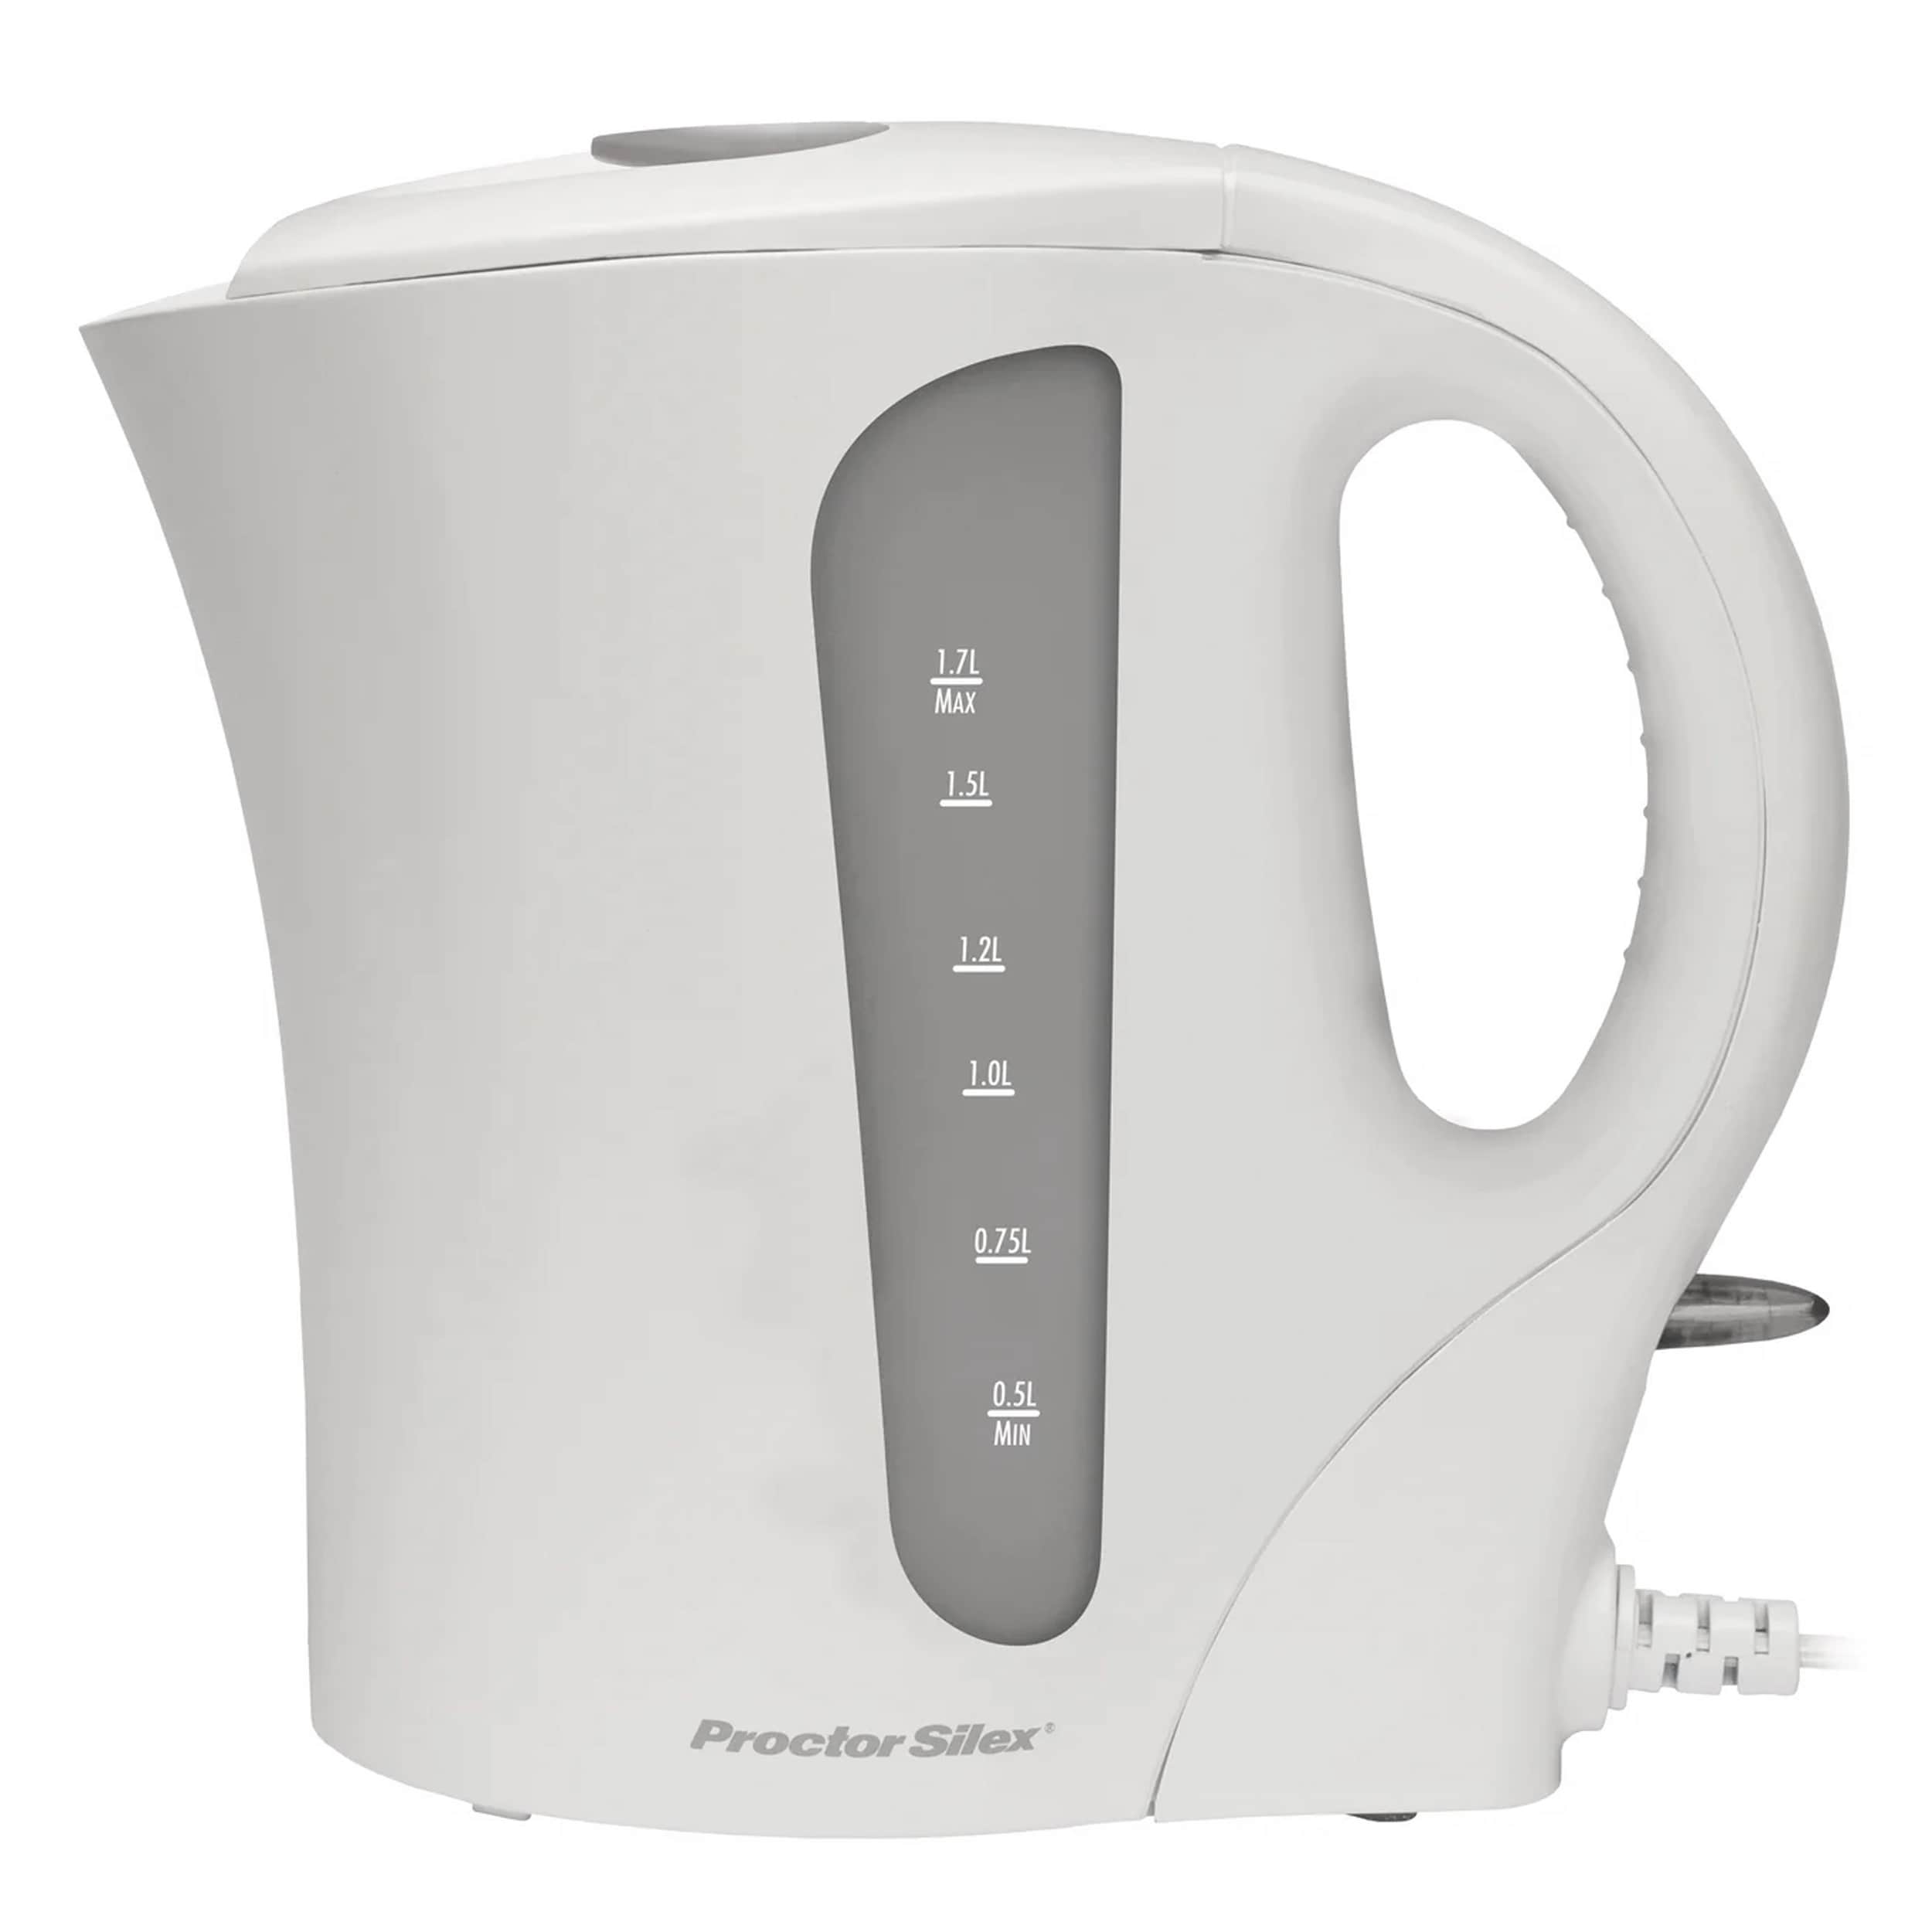 KEEBAR Electric Tea Kettle, Stainless Steel, 1.8L, Double Wall Cool Touch,  1500W Hot Water Boiler for Coffee & Tea, Auto Shut-Off & Boil Dry  Protection in 2023